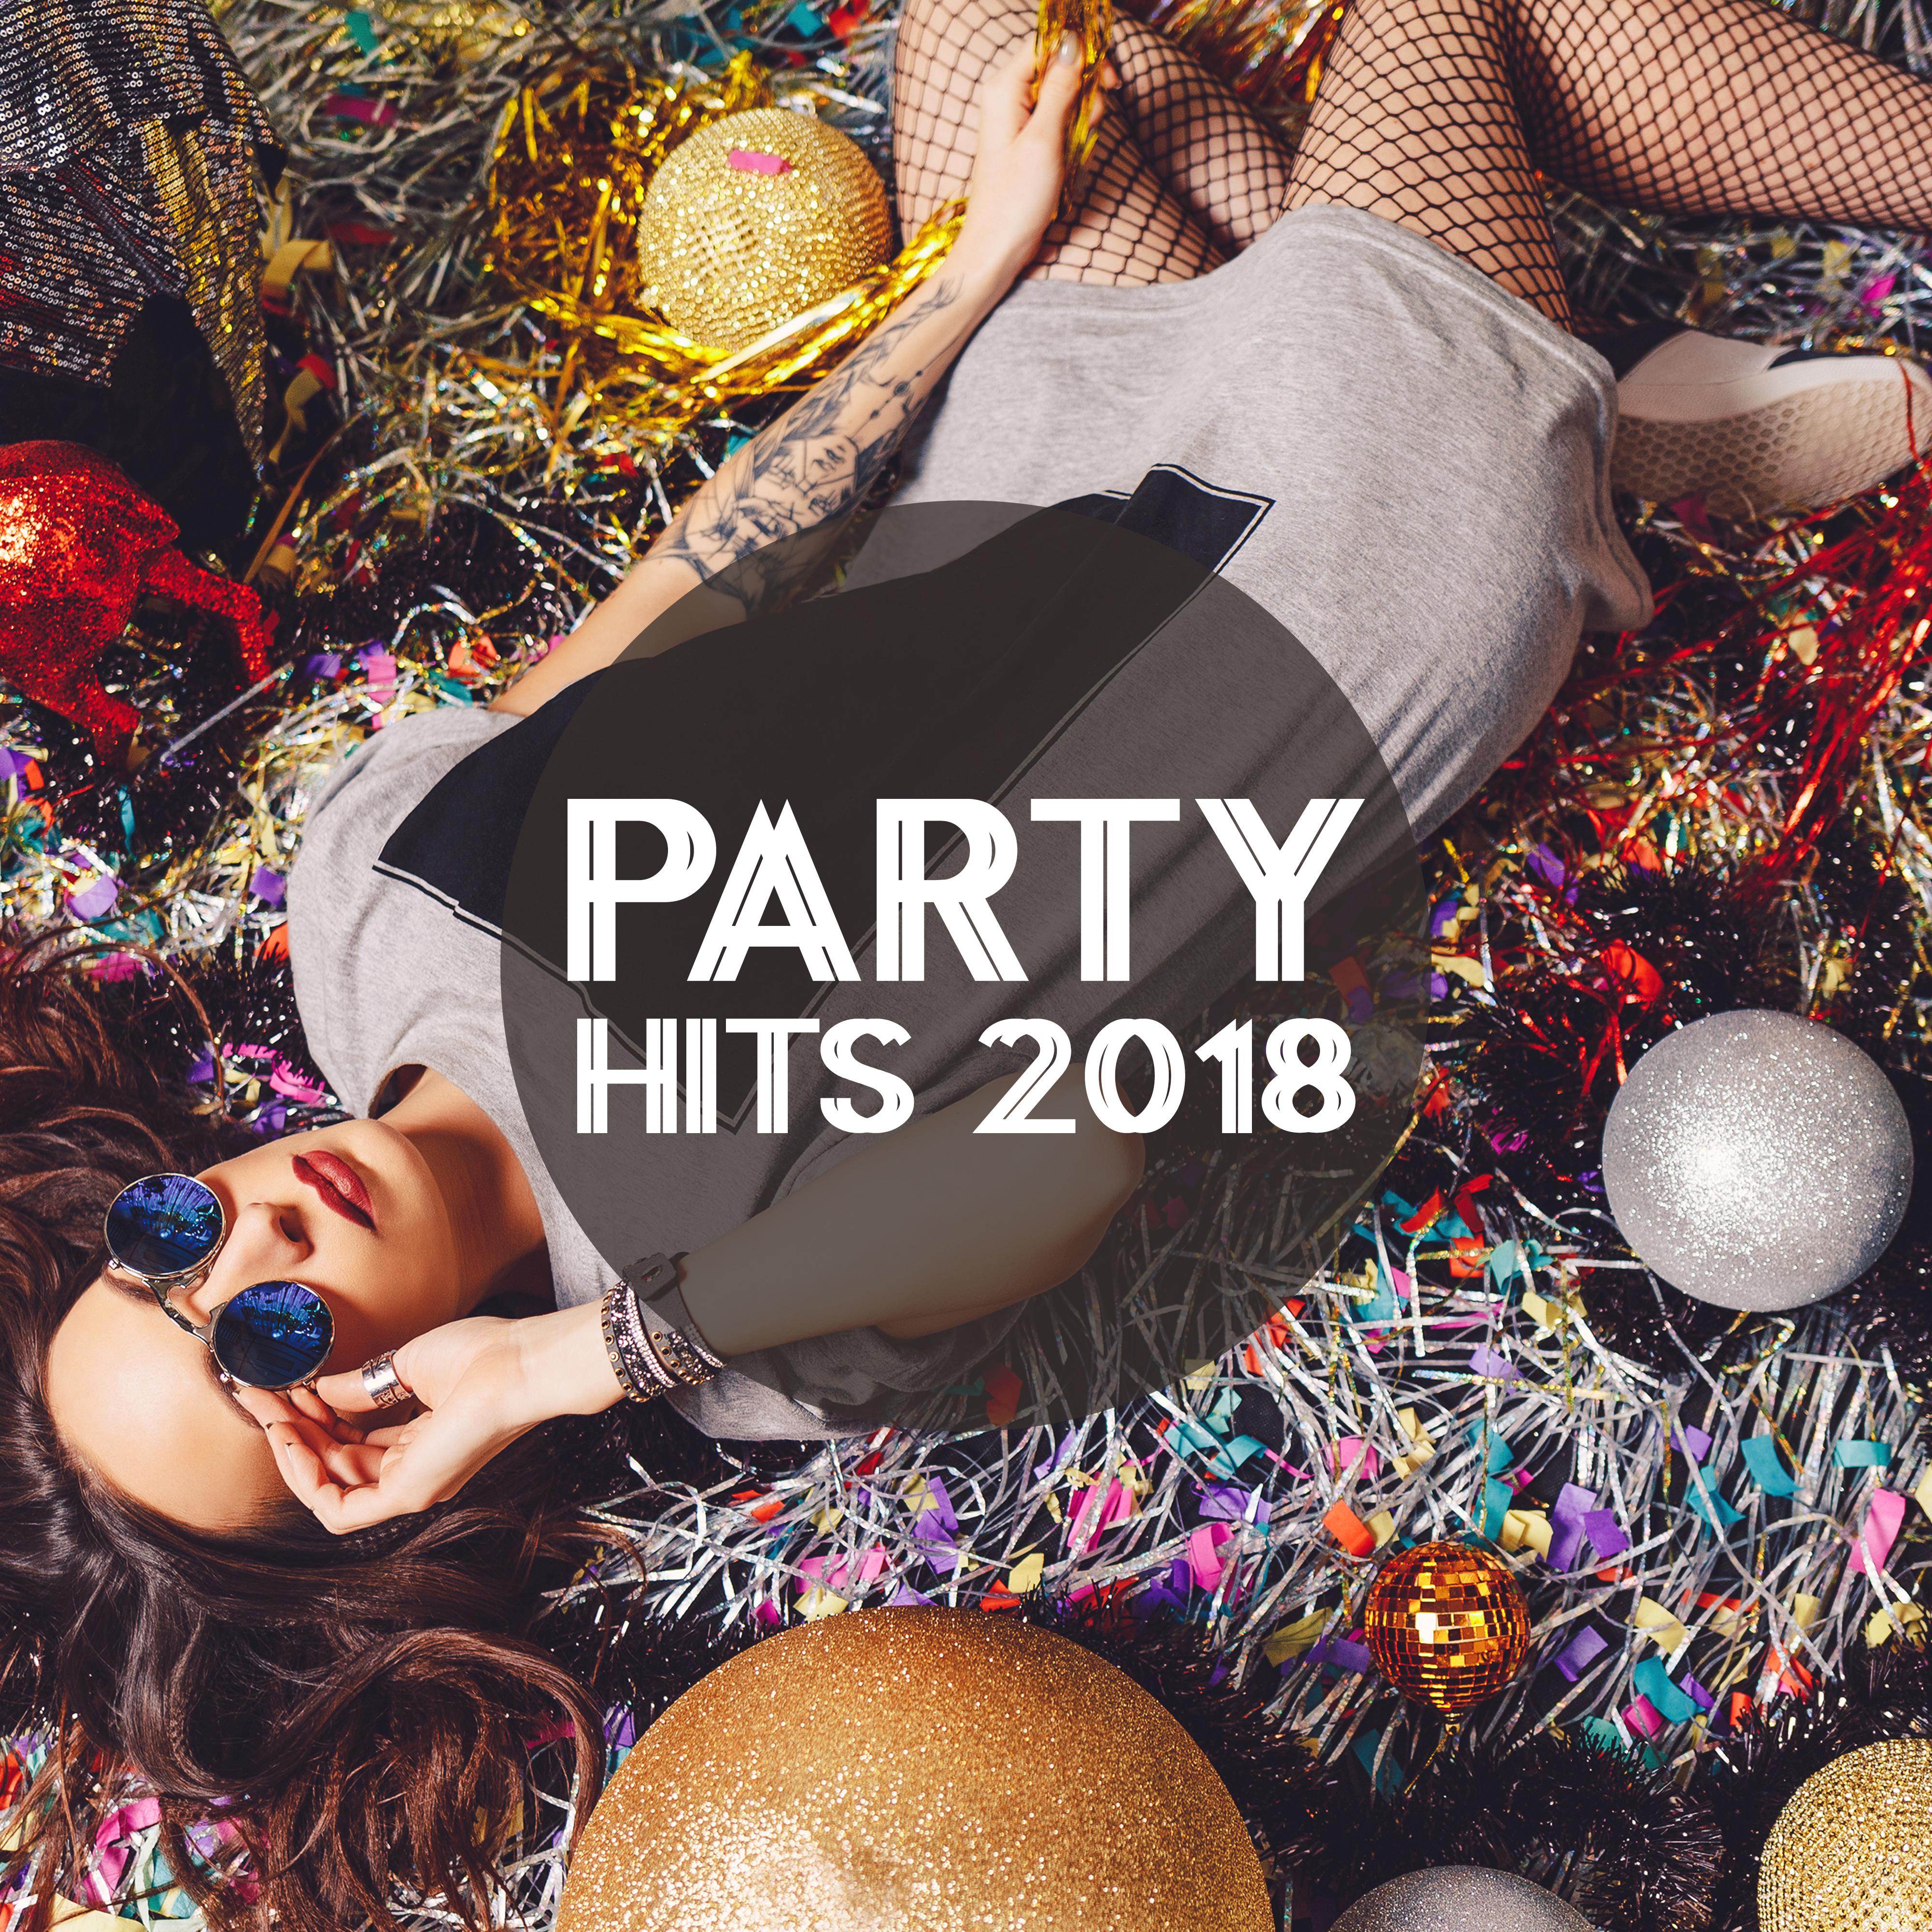 Party Hits 2018 – Summer Chillout Music